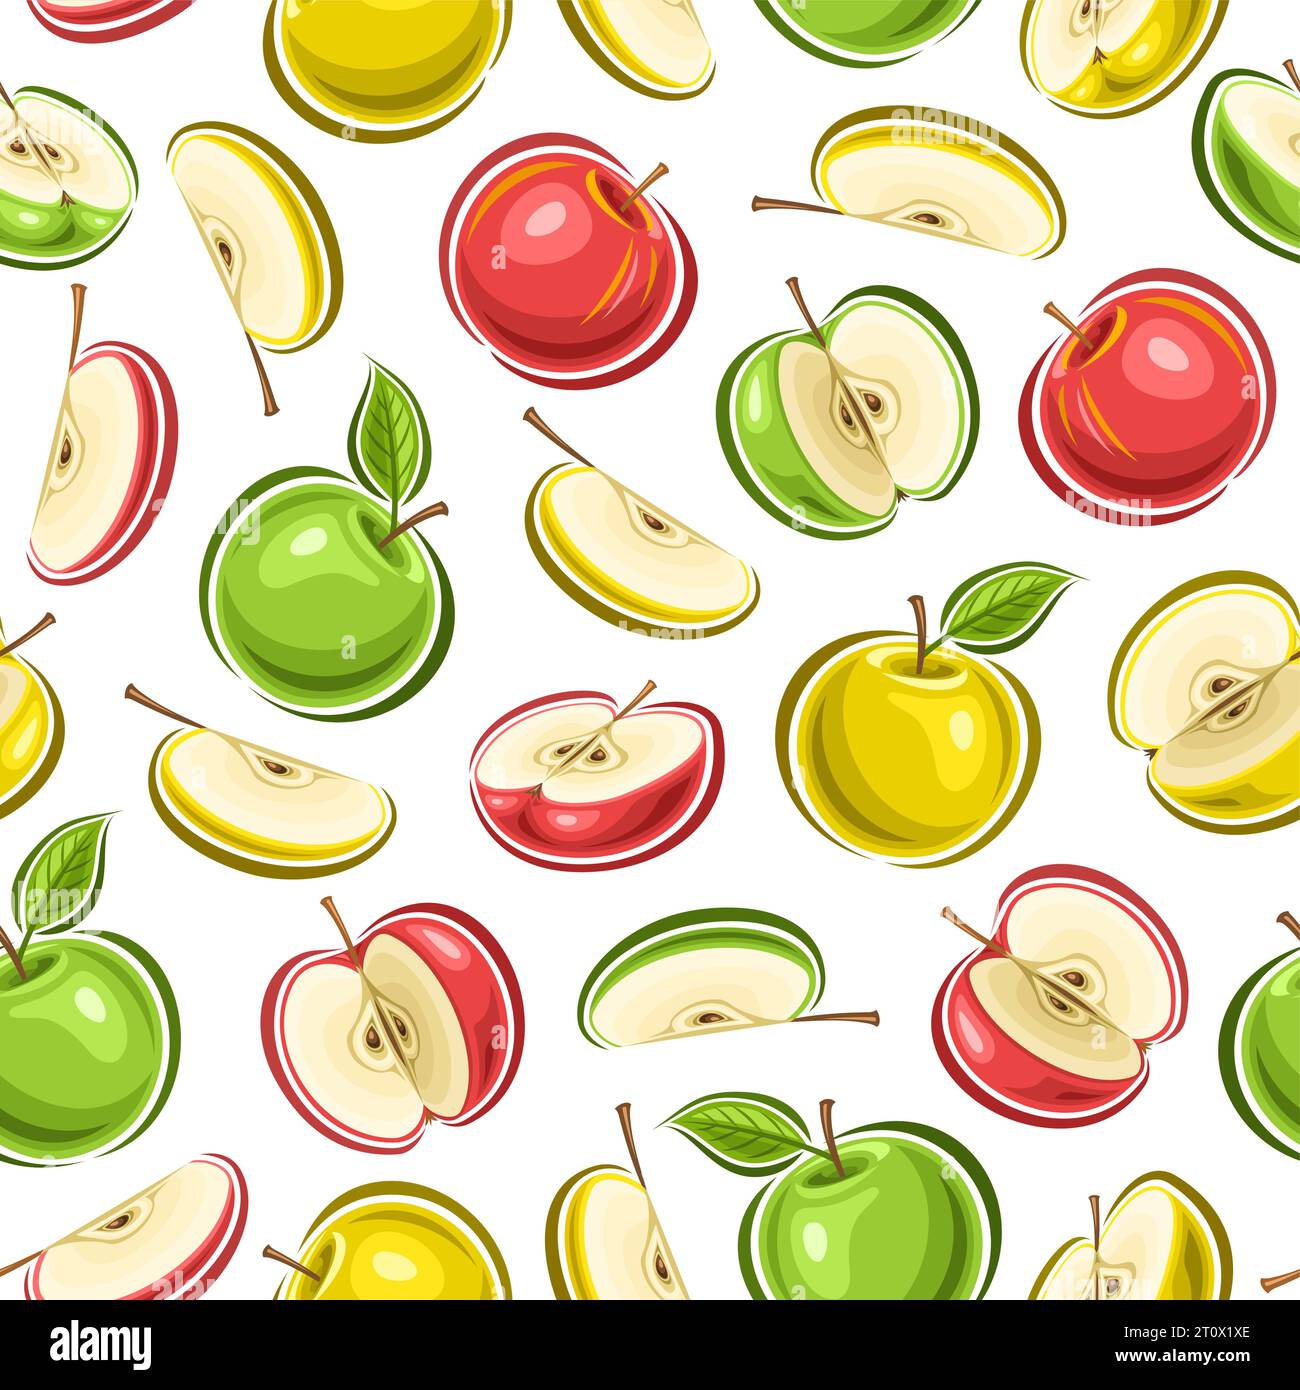 Vector Colorful Apple seamless pattern, square repeat background with cut out illustrations of ripe chopped apples with green leaves for wrapping pape Stock Vector